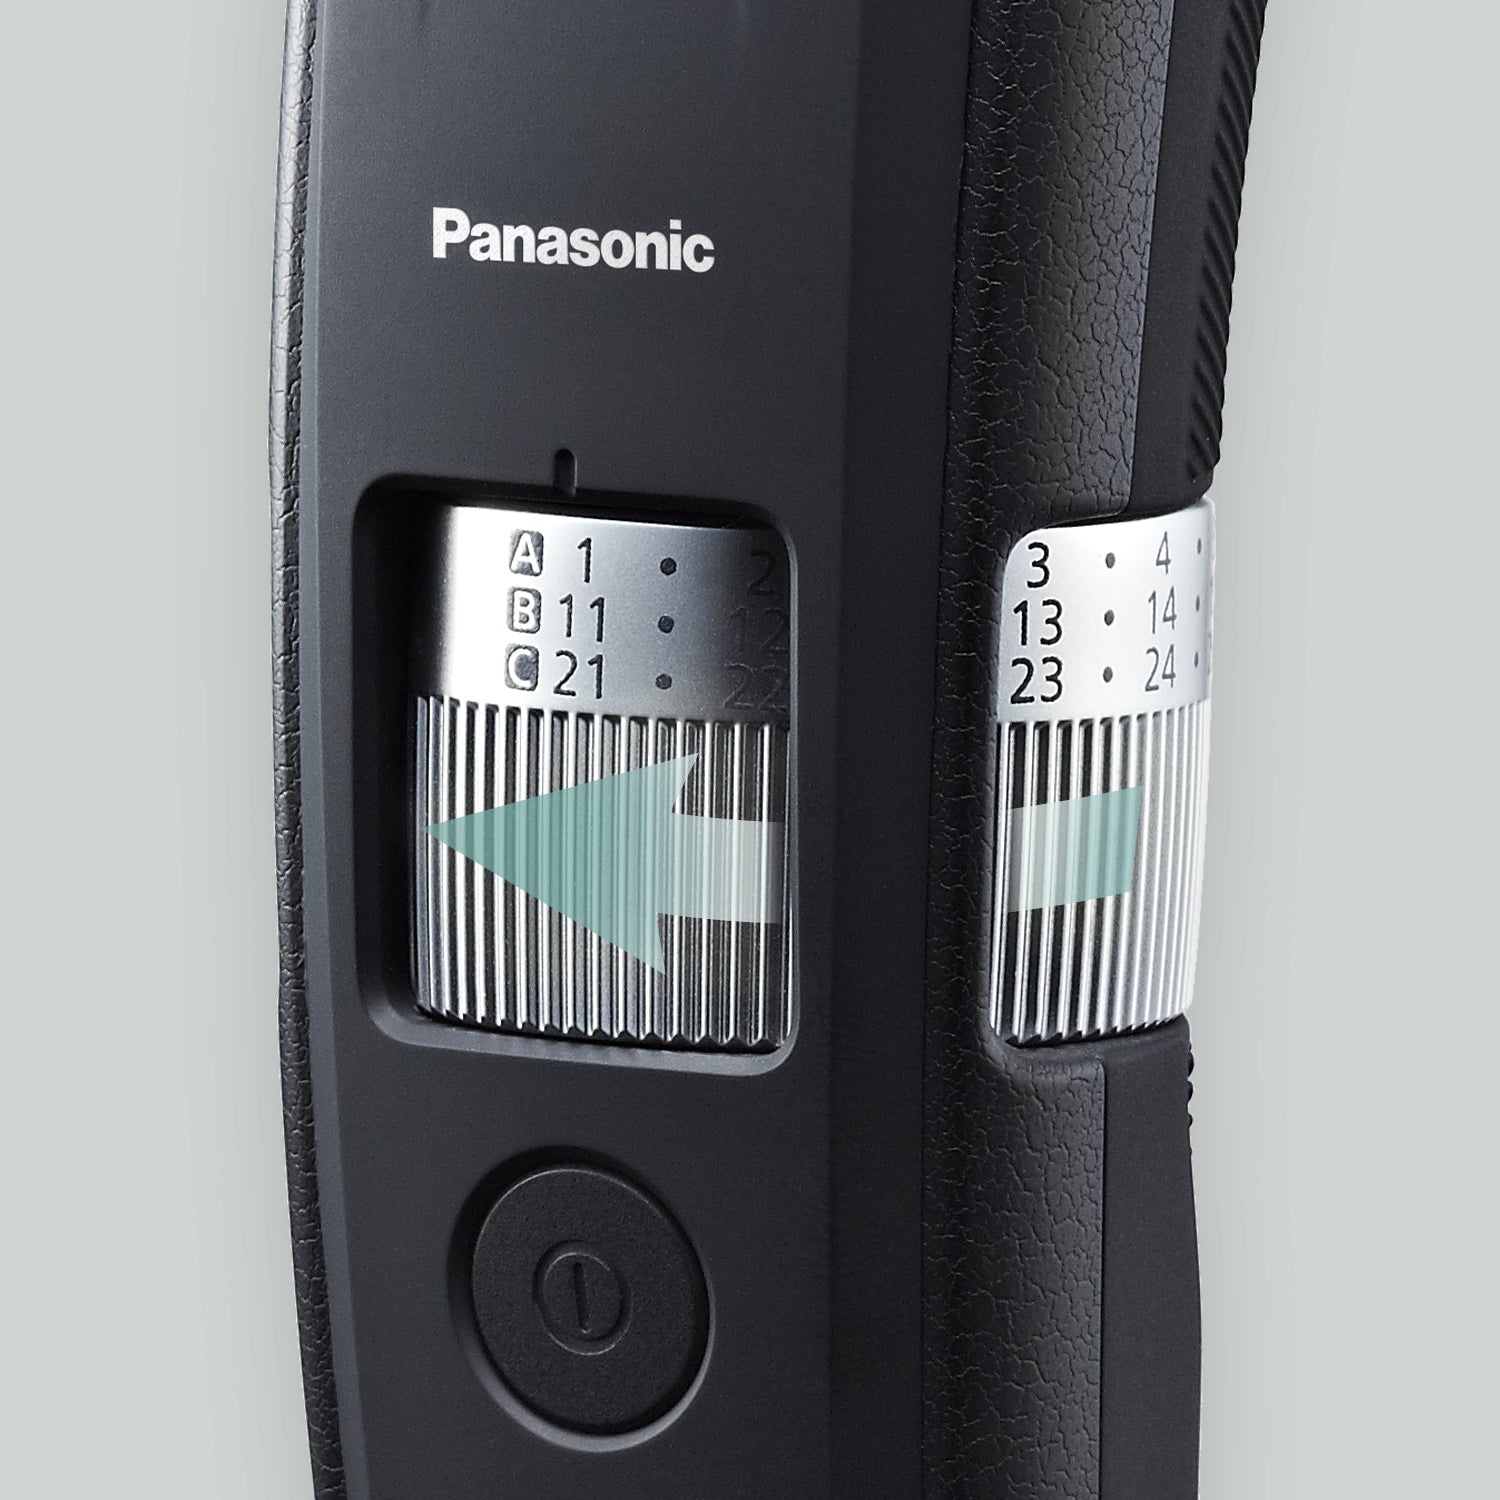 - Attachments ER-GB96-K Long Beard 4 Hair Settings Comb with and Length Adjustable 58 Panasonic Trimmer